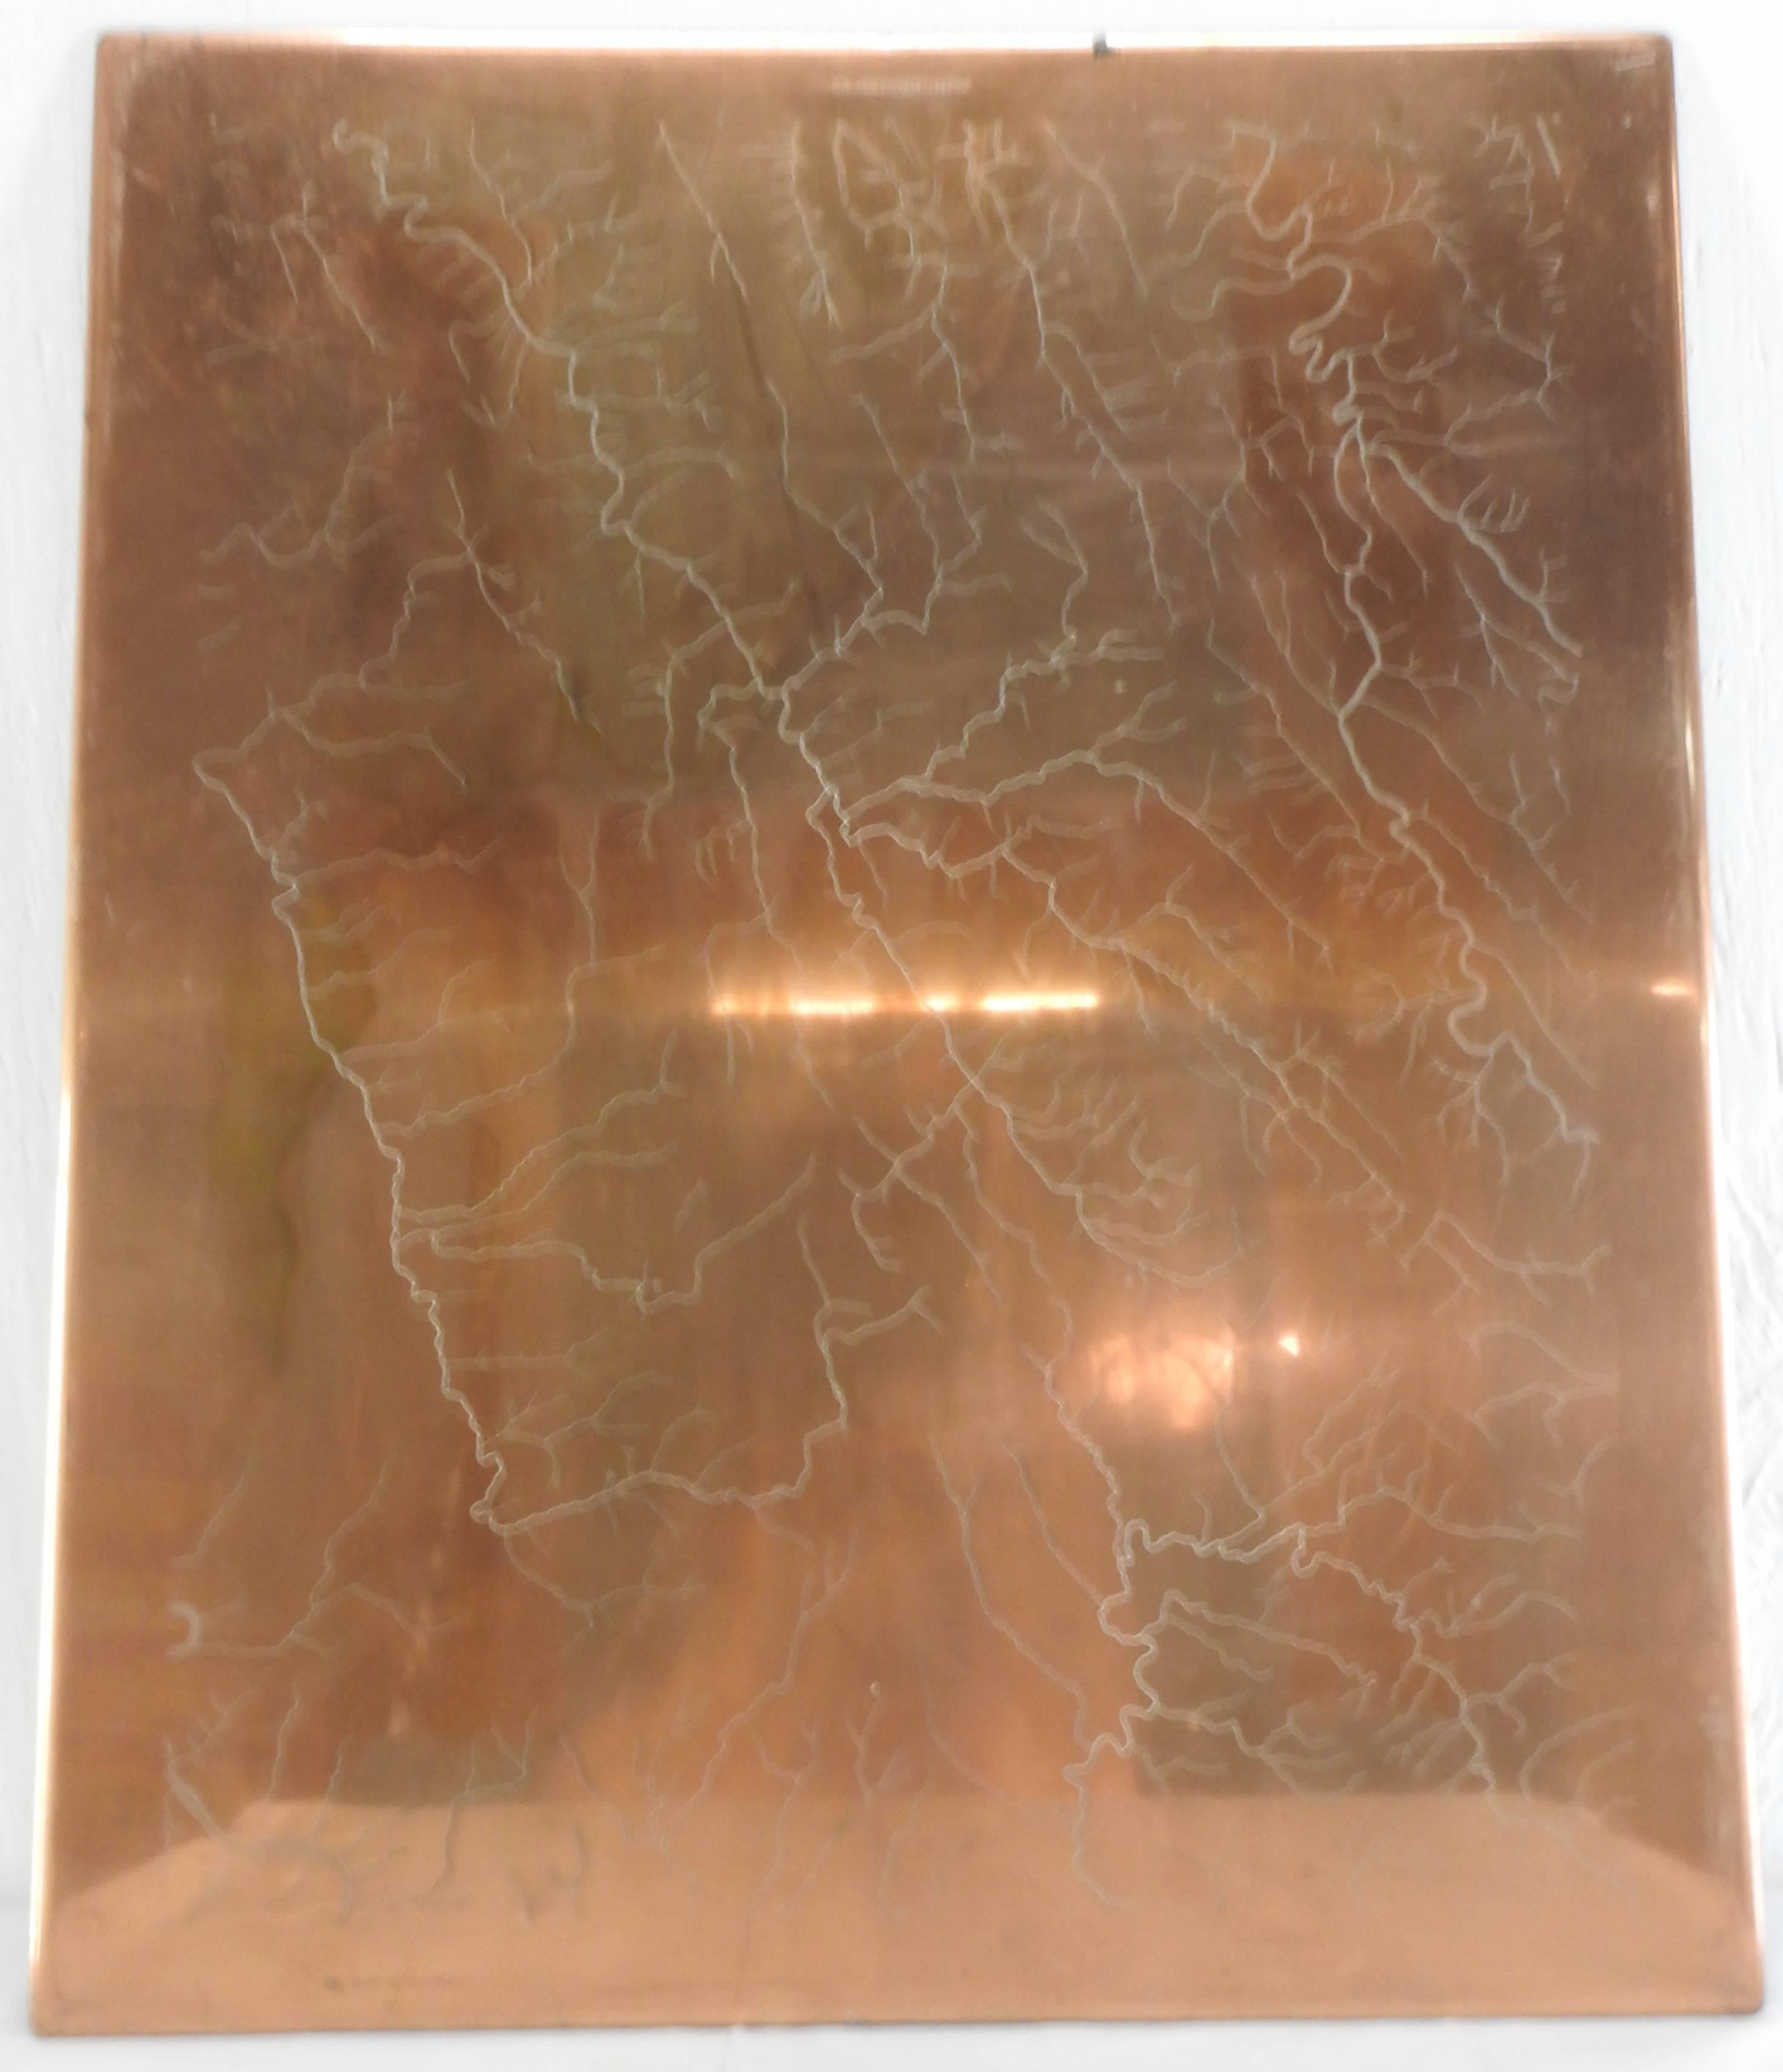 This is a unique antique copper printing plate for Winchester, Virginia. It is a waterway plate. The plate is labelled “Winchester 83” and is presented unframed.